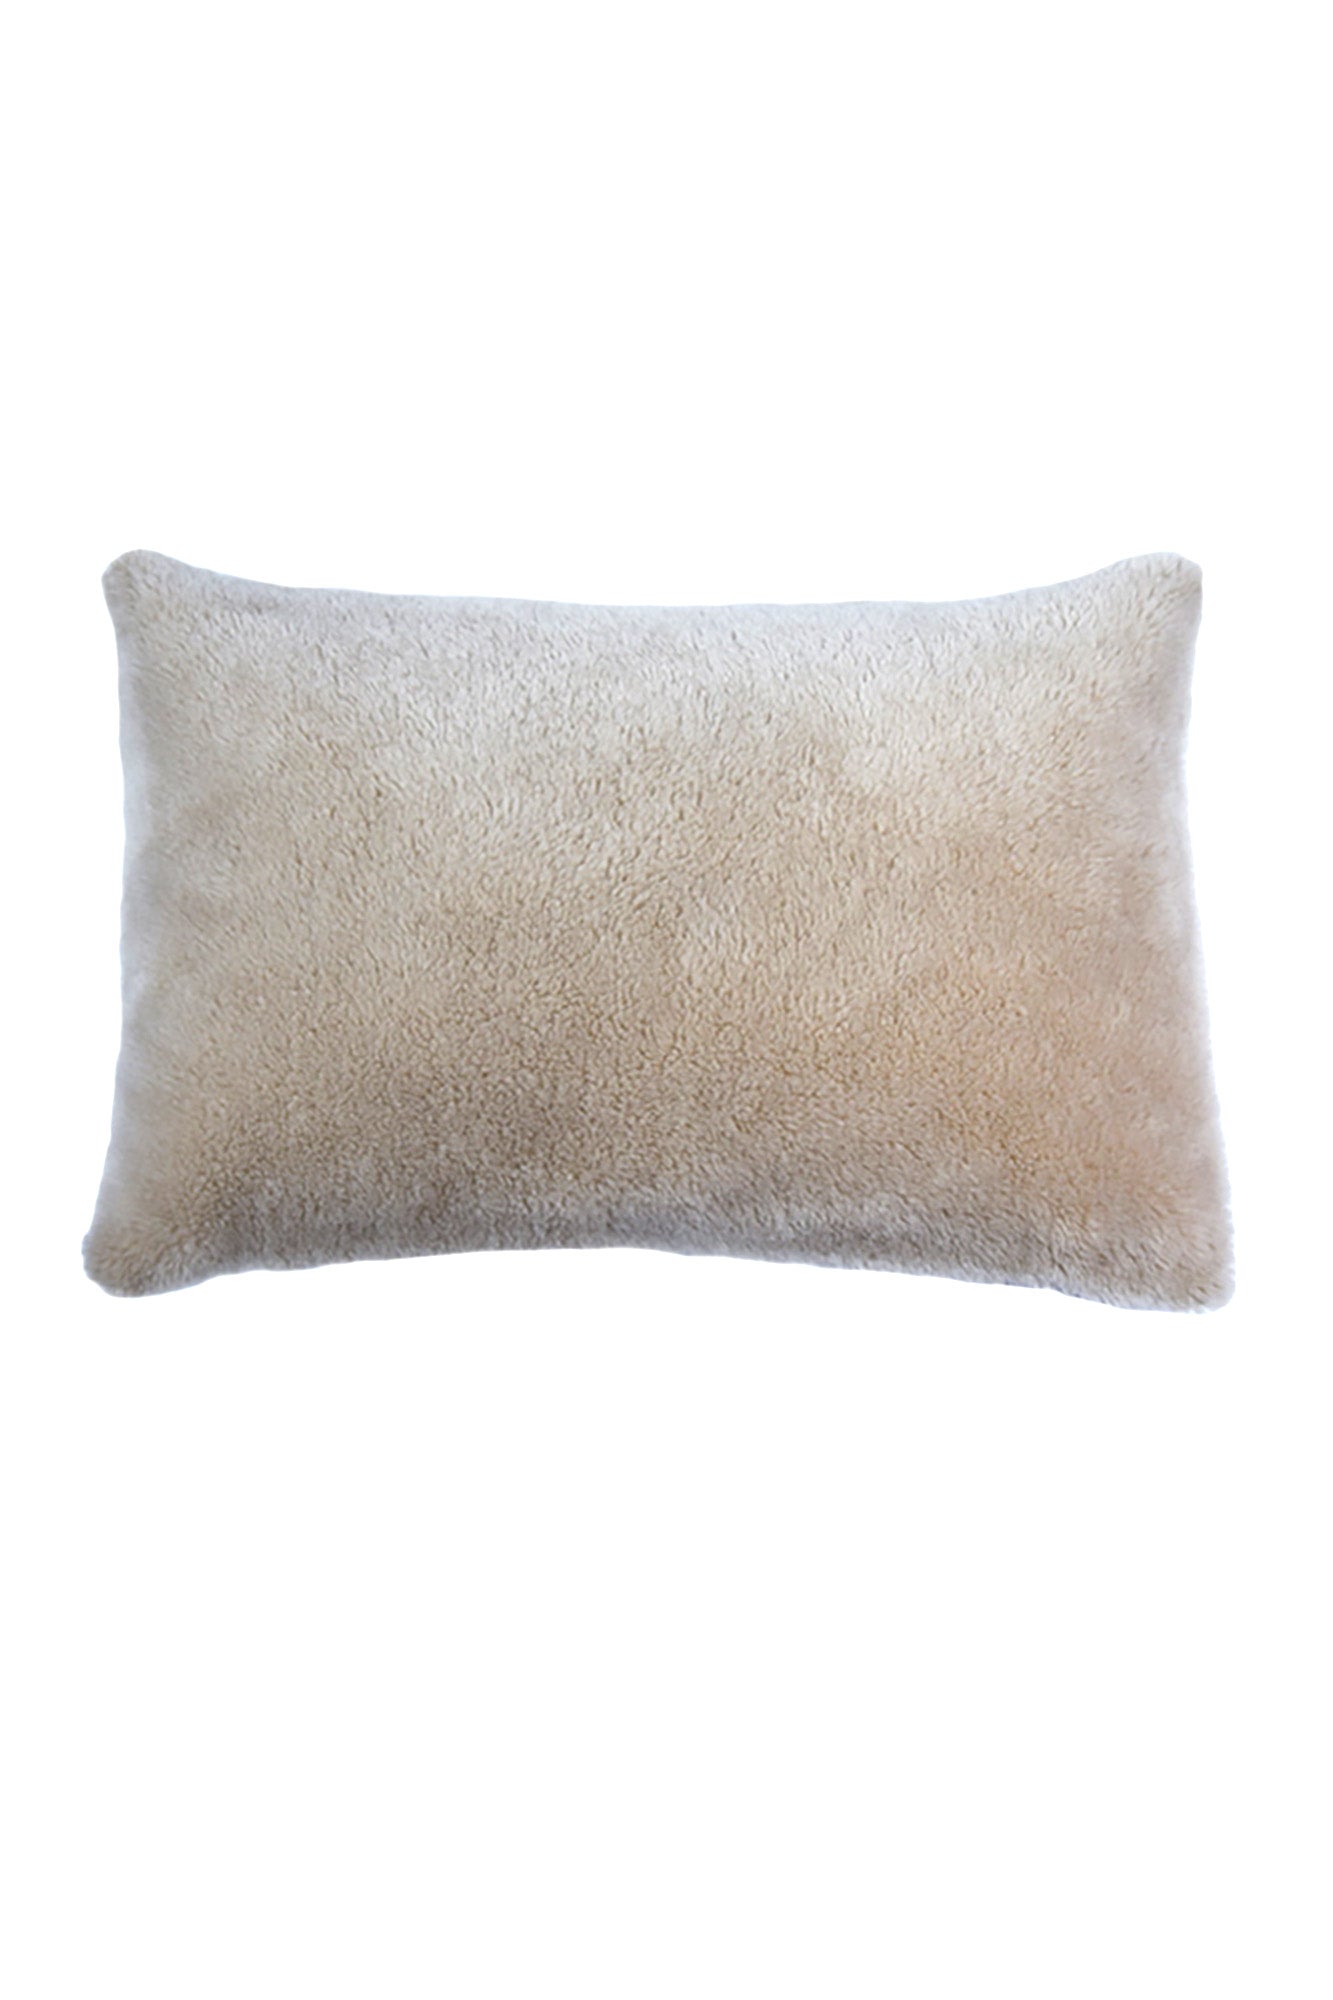 PILLOW SUPERIOR ECO WOOL BEIGE 40X60